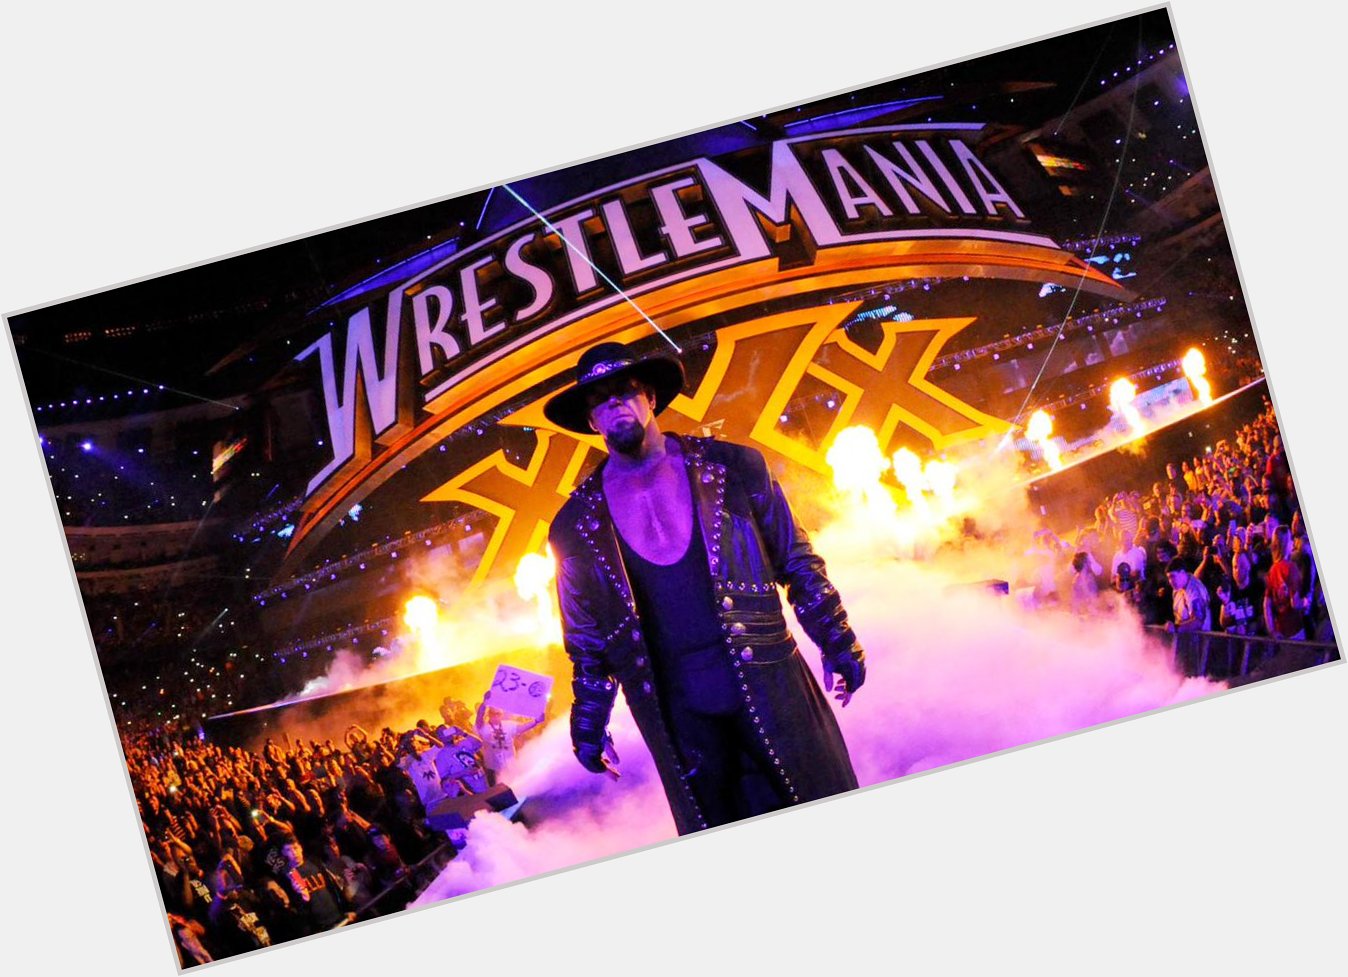 Happy 57th birthday to The Undertaker 